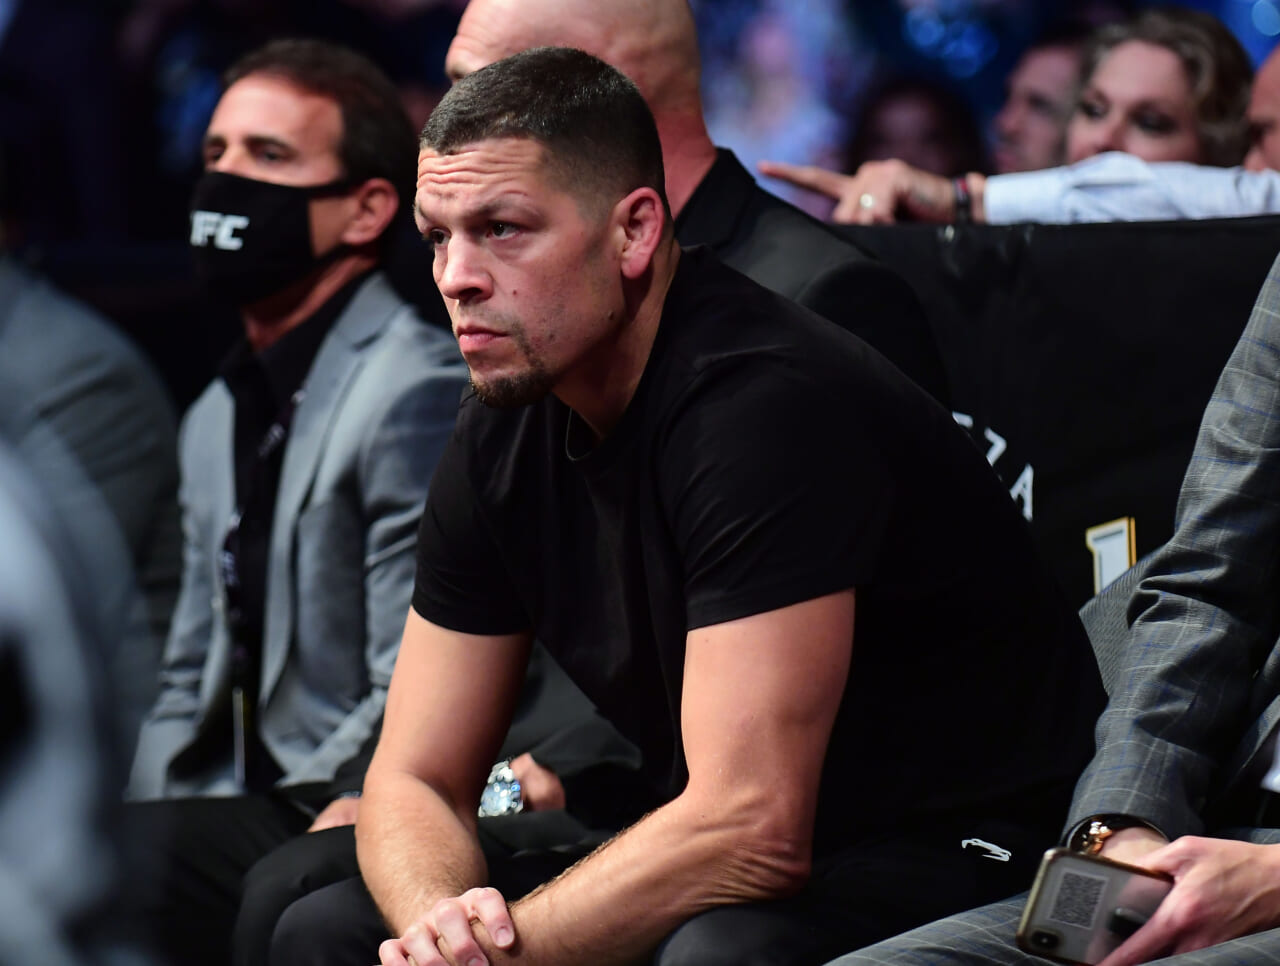 Nate Diaz open to re-signing with UFC, but wants to finish his contract first